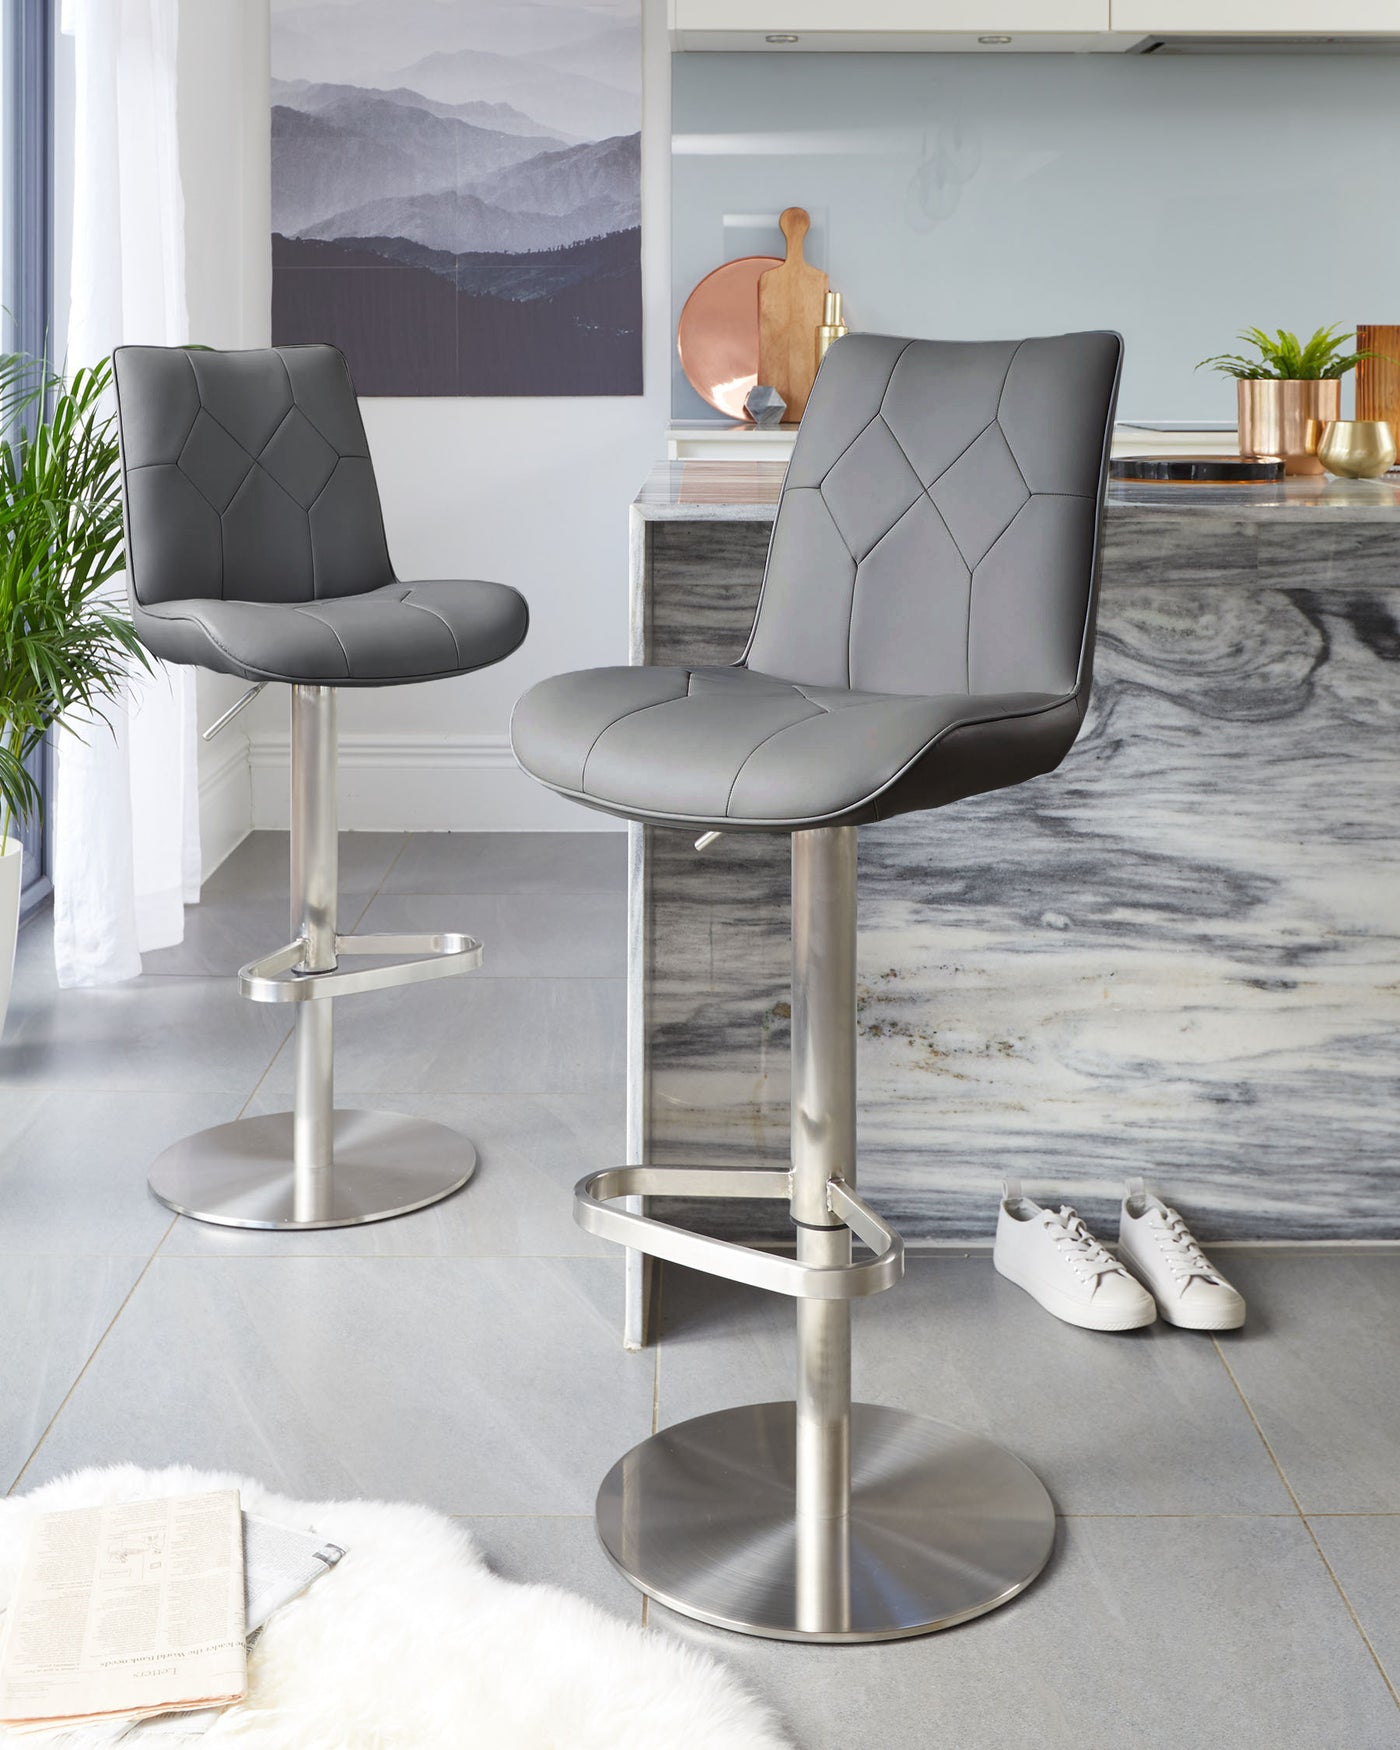 A pair of modern bar stools with chrome pedestals, featuring adjustable height, a footrest, and quilted faux leather seats in a neutral grey tone, suitable for contemporary kitchen or bar areas.